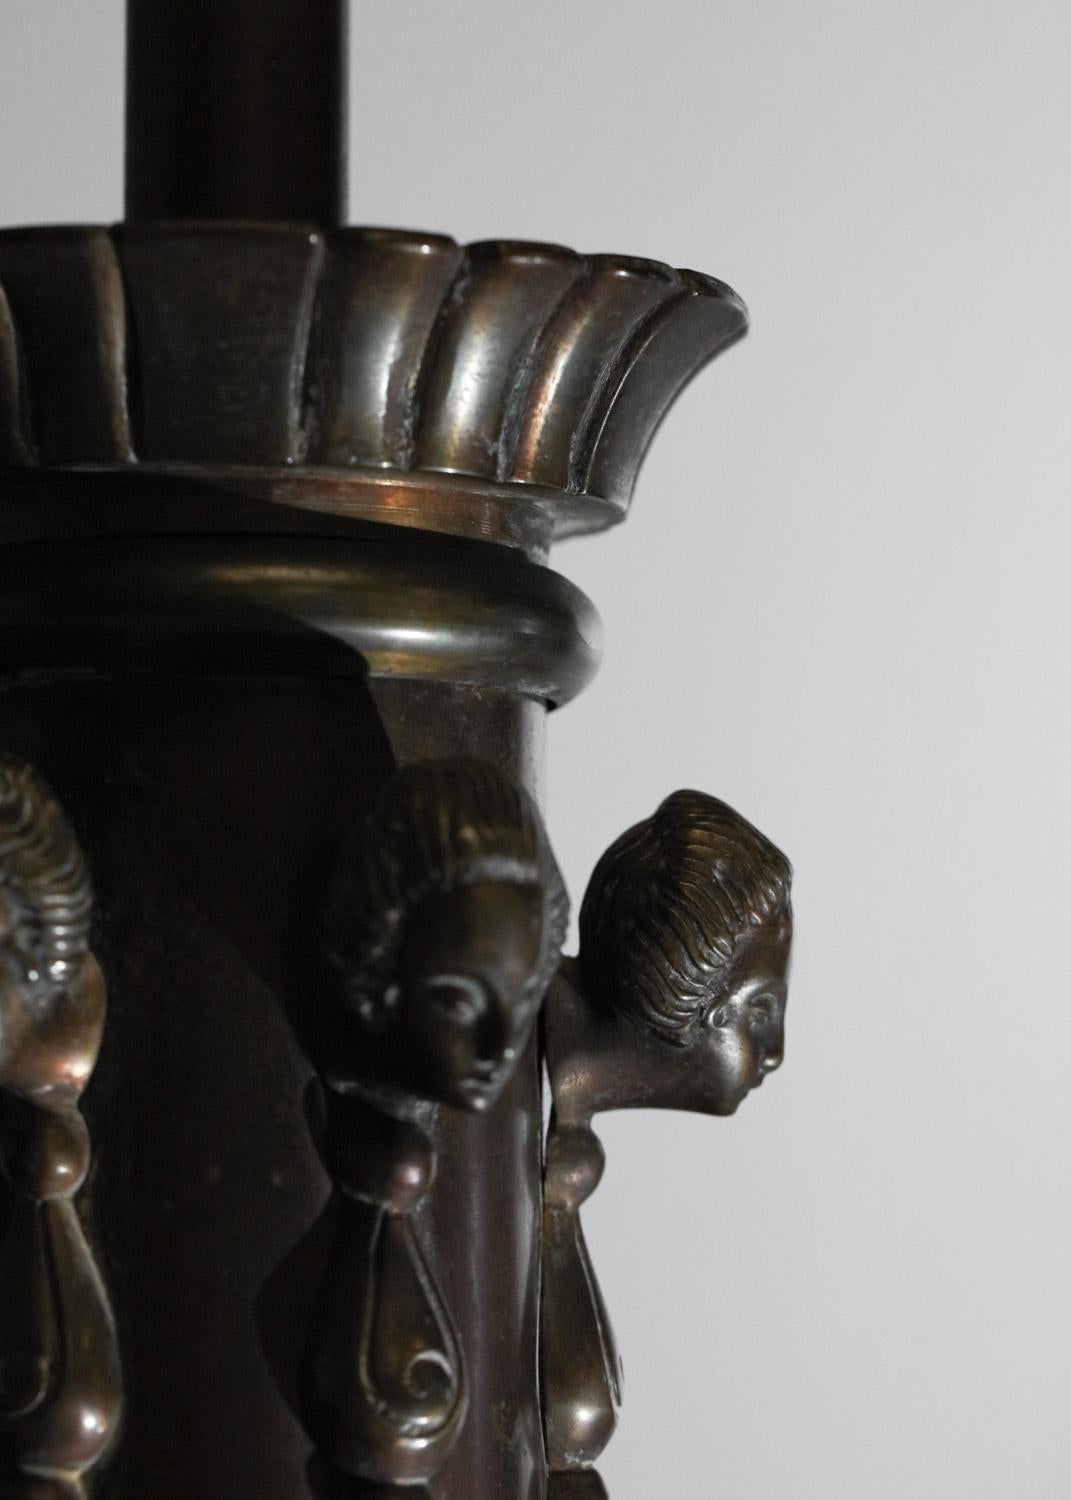 French bronze chandelier from the 30s/40s. Solid bronze structure with black patina, lampshade cups and frosted glass central disk. Superb detailing of the bronze work, with the central column decorated with women's heads. Very fine vintage